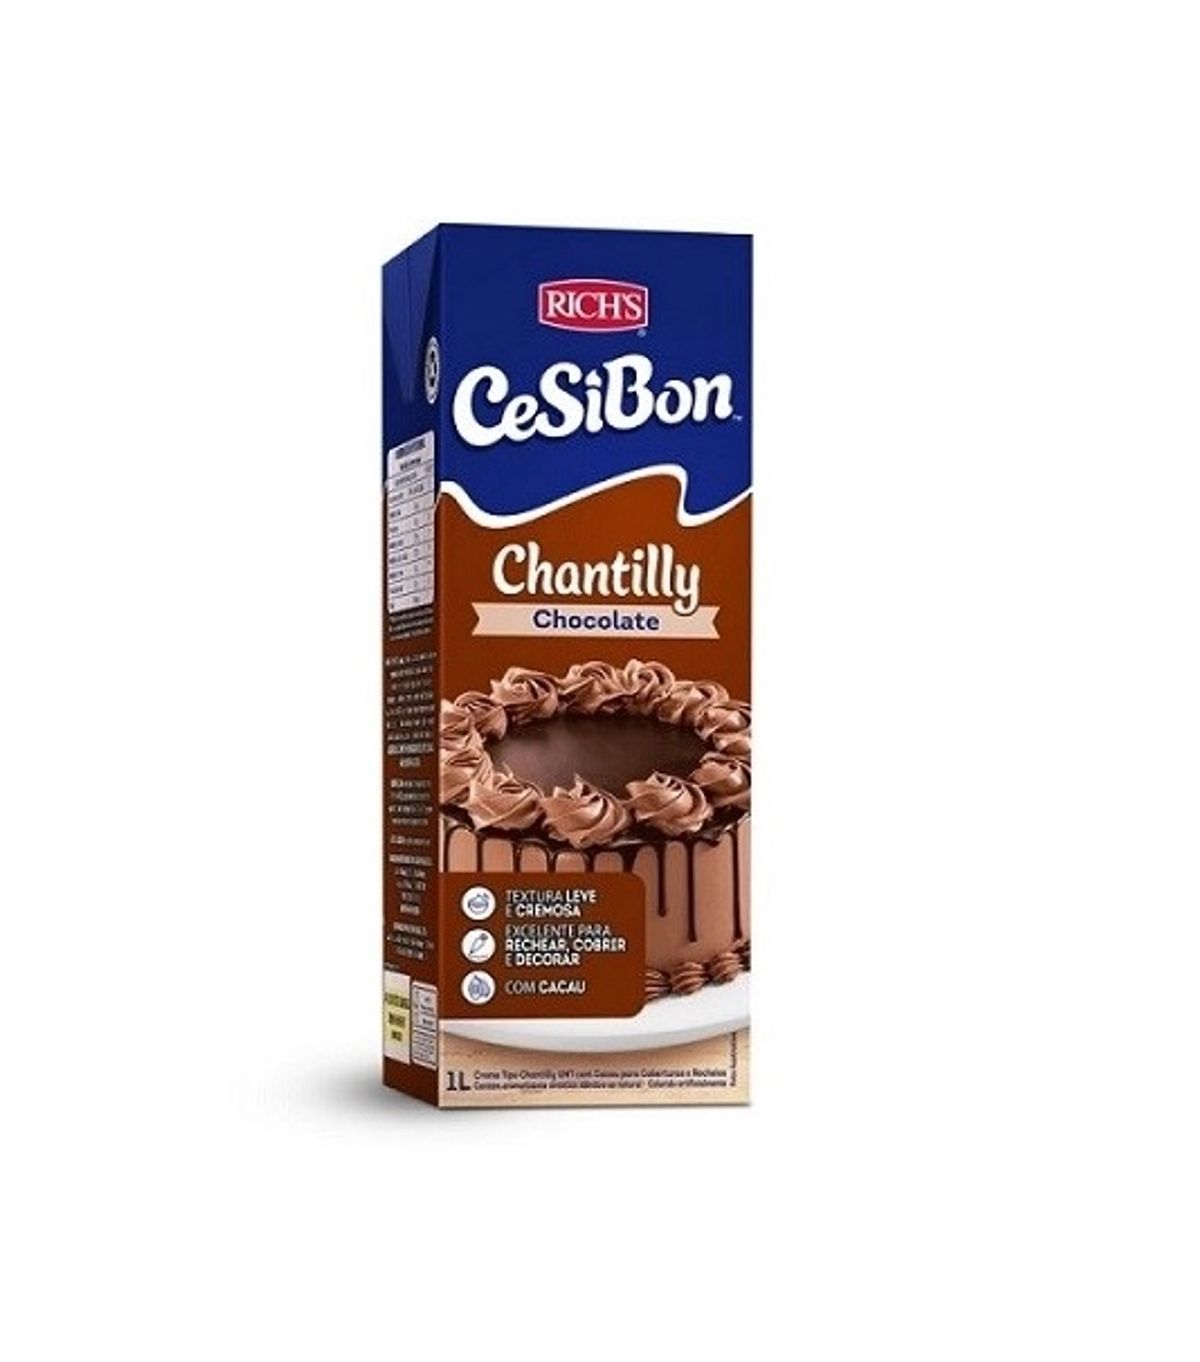 Chantilly Cesibon Chocolate 1l image number 0